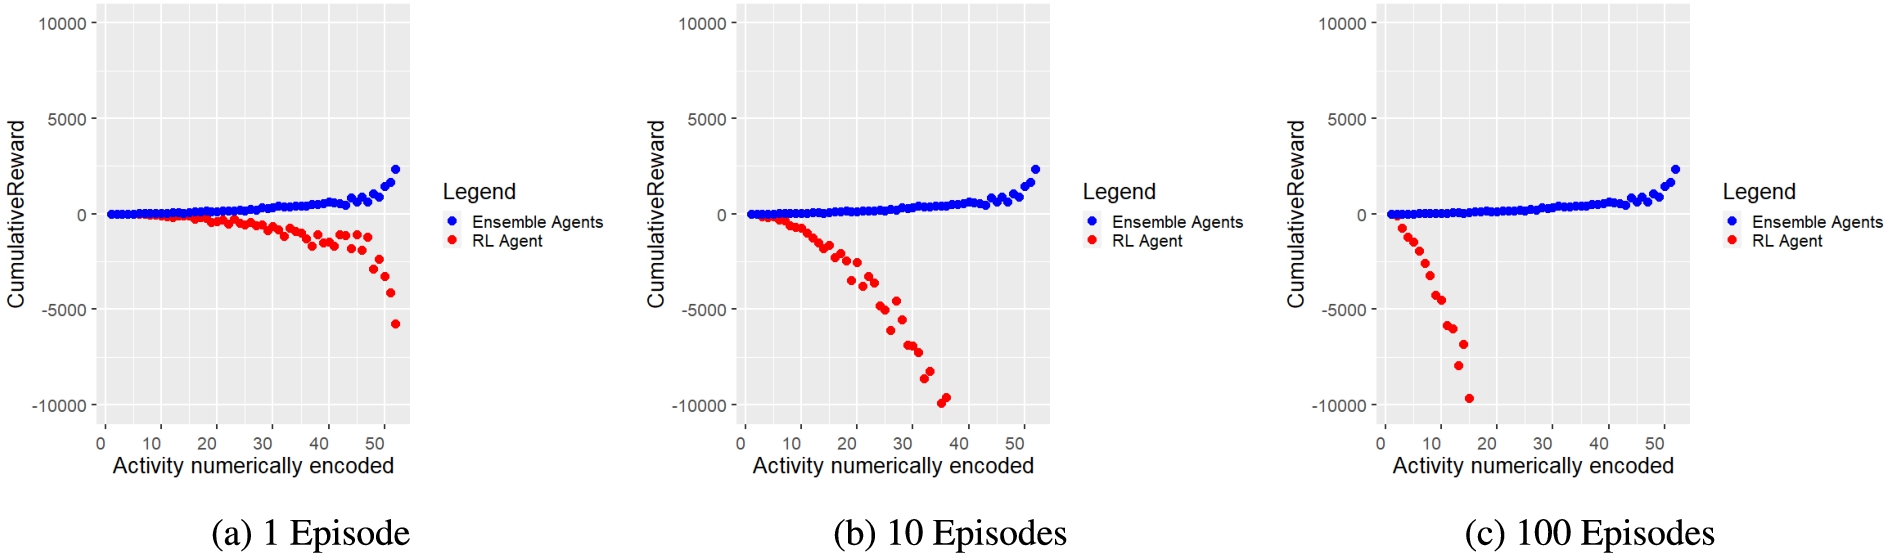 Cumulative reward (y-axis) for each activity (x-axis) obtained during composition by ensemble agents (blue dots) and during training by RL agent (red dots) after 1, 10 and 100 episodes. It is striking that ensemble agents consistently accumulate positive cumulative reward across all activities assessed. For visualisation reasons, the y-axis had to be limited to a range between −10000 and 10000. Therefore, some data points are not shown in the graphs because they are outside the range shown. However, the trend of the data points remains constant and it becomes obvious that the measured values diverge strongly.